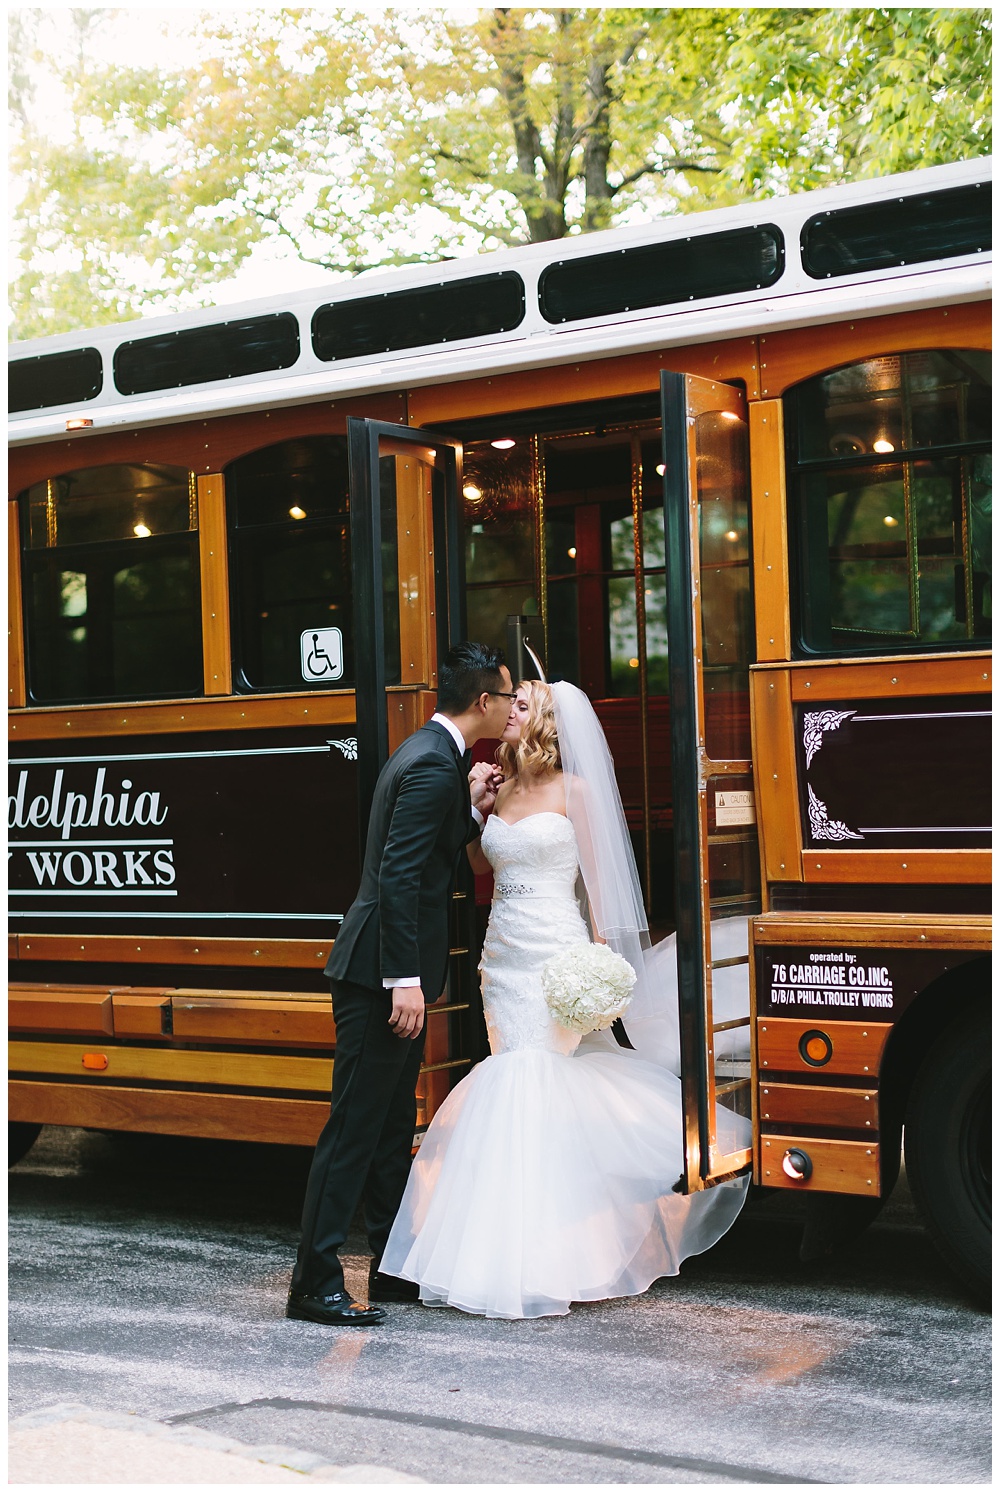 Bride and groom posing in front of the Philadelphia Trolley by AGS Photo Art